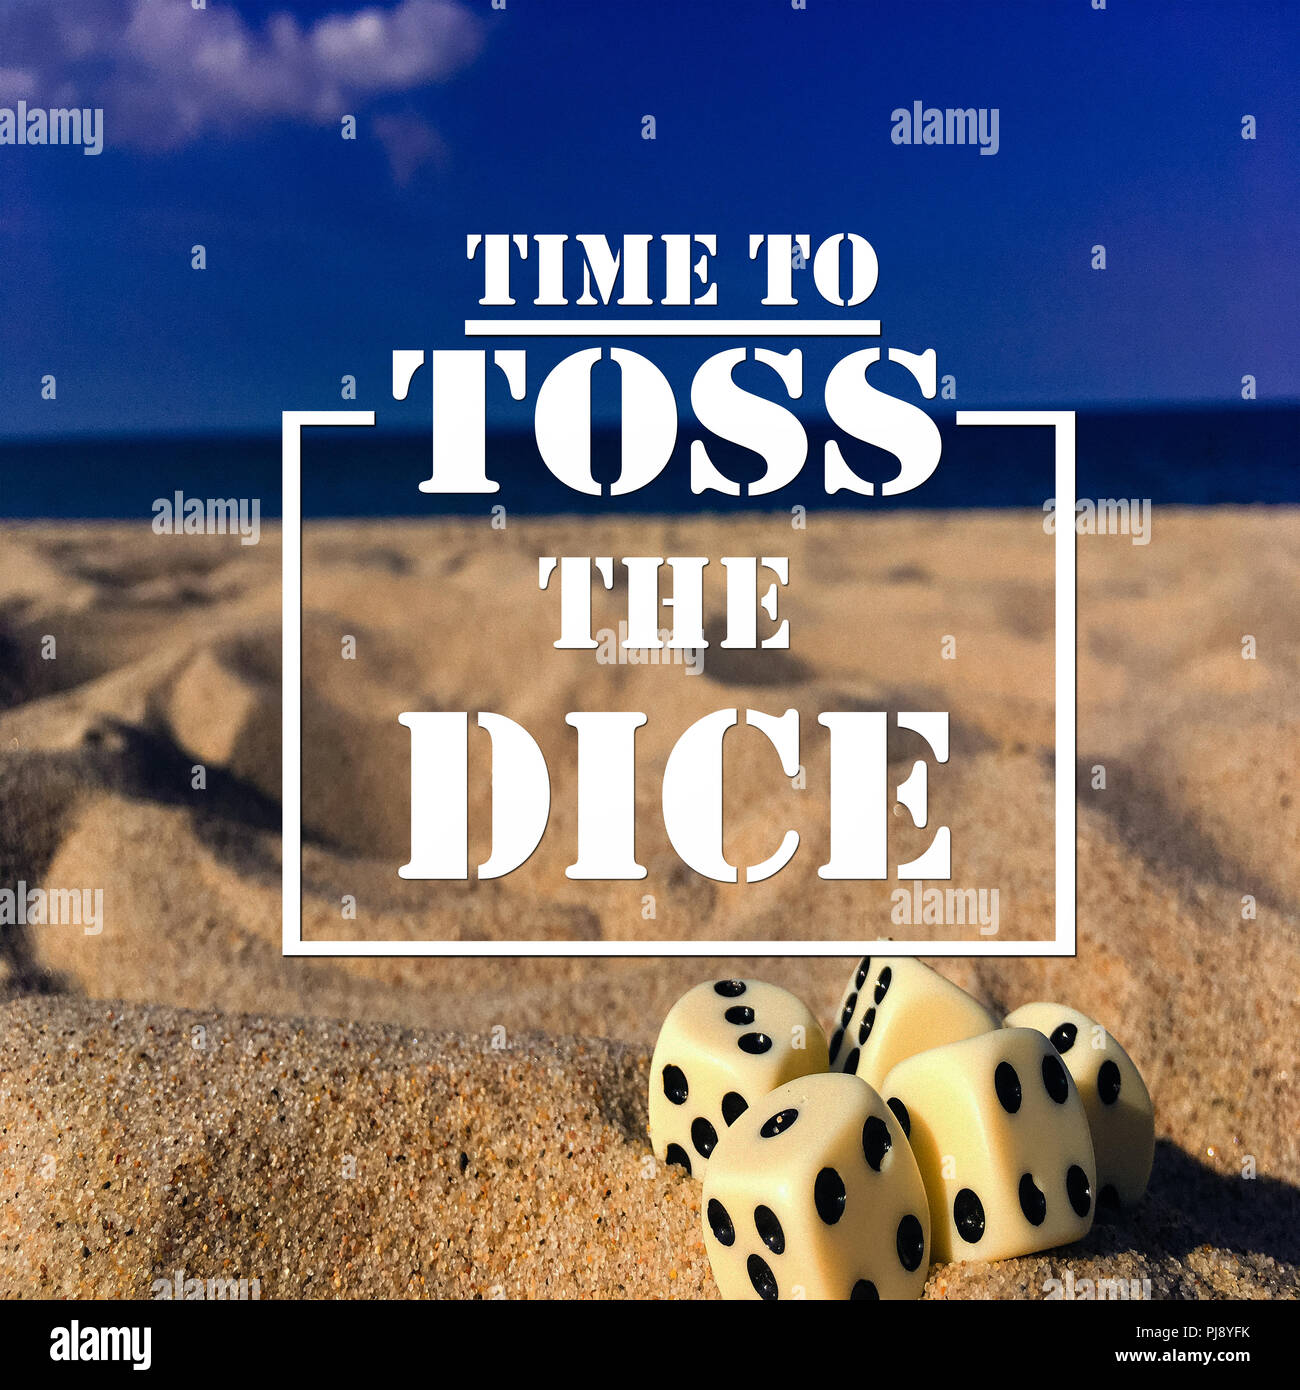 Inspirational Quotes Time To Toss The Dice Positive Motivational